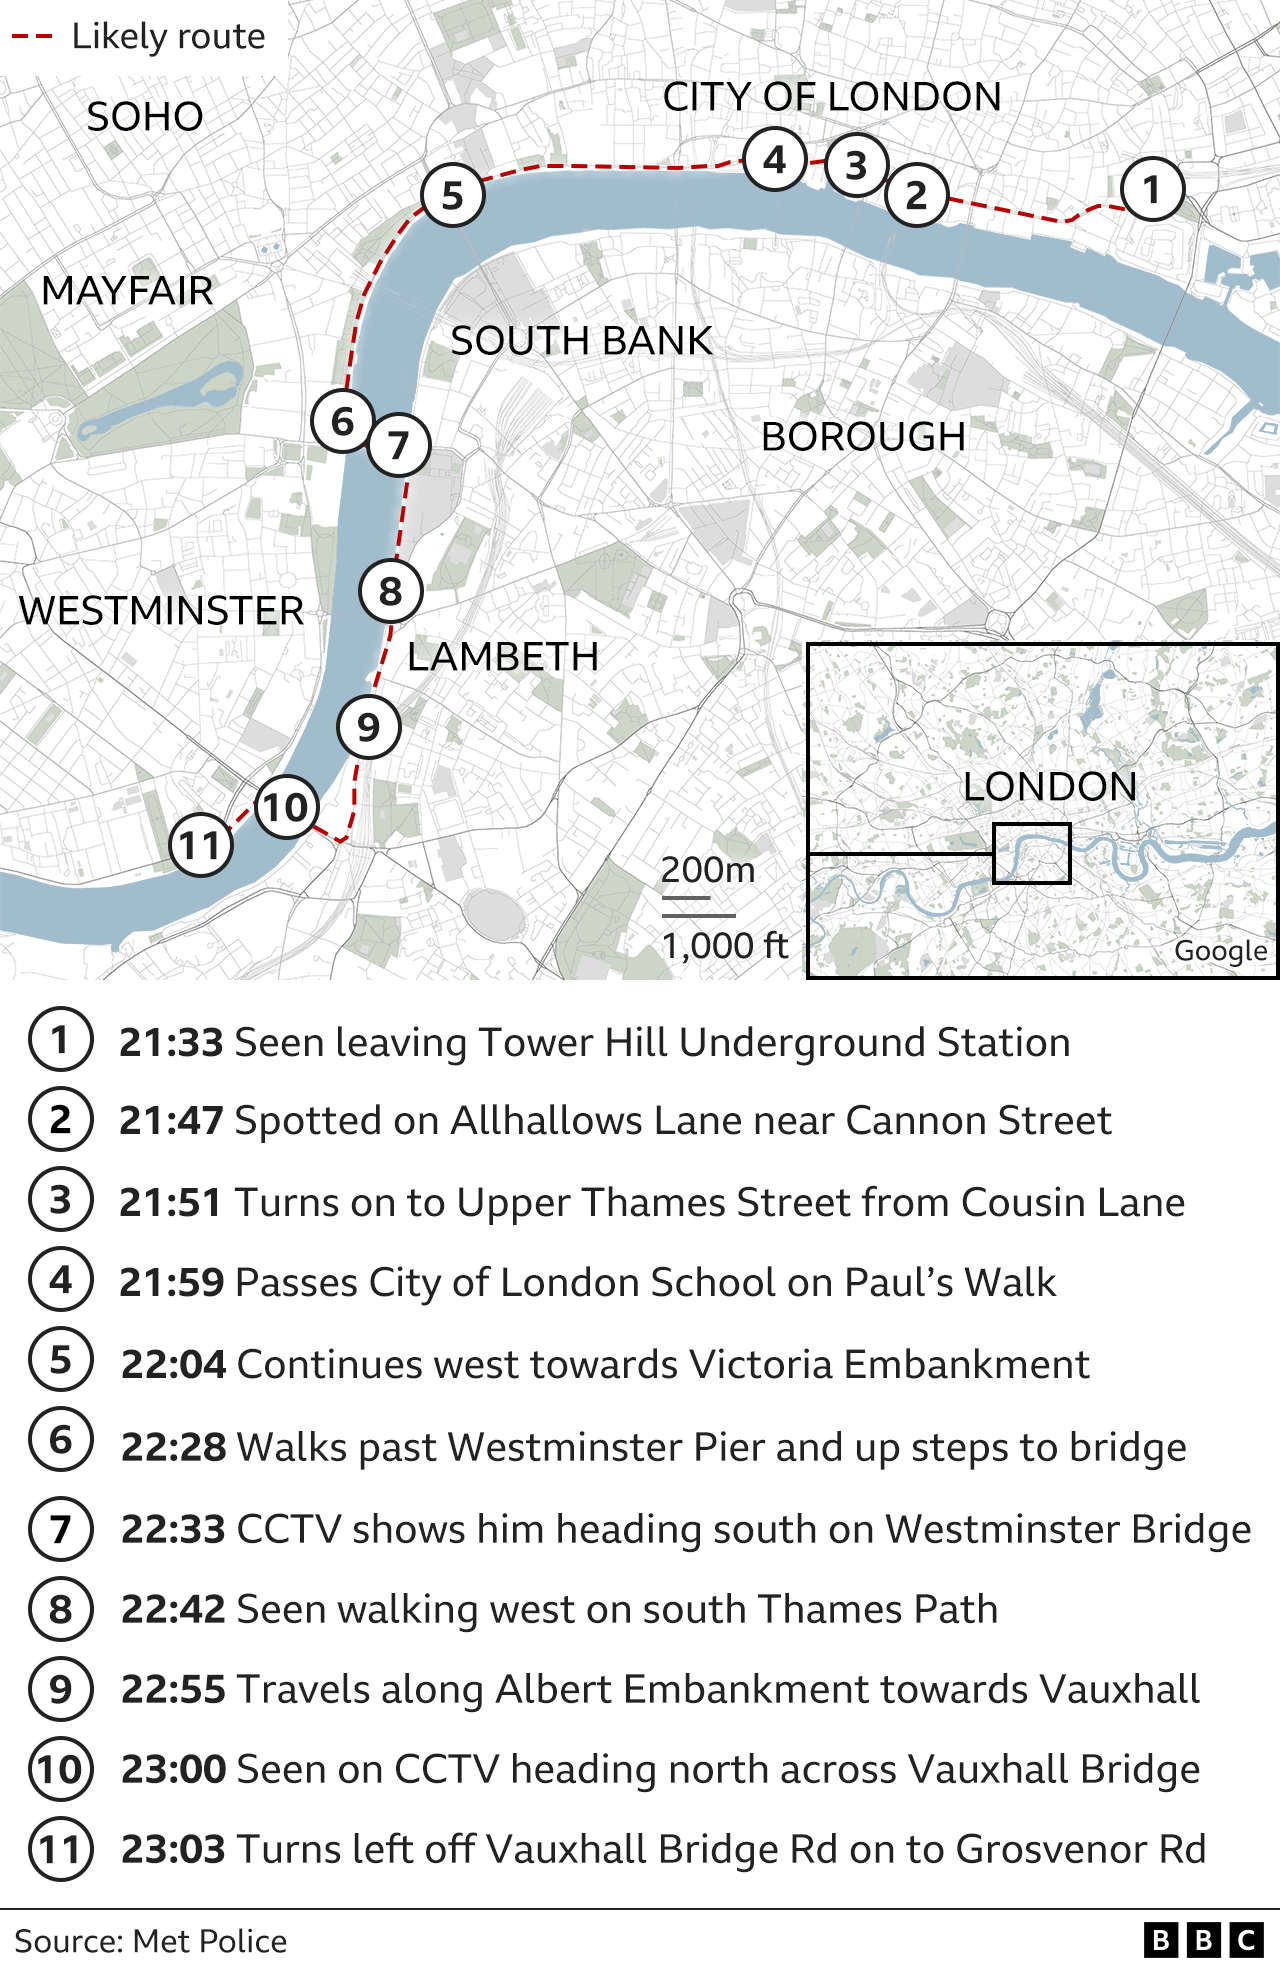 Map showing Ezidi's journey on foot - 21:33 leaves Tower Hill station, 21:47 on Allhallows Lane, 21:51 on Upper Thames Street, 21:59 on Pauls Walk, 22:04 heads towards Victoria Embankment, 22:28 passes Westminster Pier up steps, 22:33 on Westminster bridge, 22:42 on south Thames, 22:55 on Albert Embankment, 23:00 crosses Vauxhall Bridge, 23:03 turns left from bridge into Grosvenor Road.